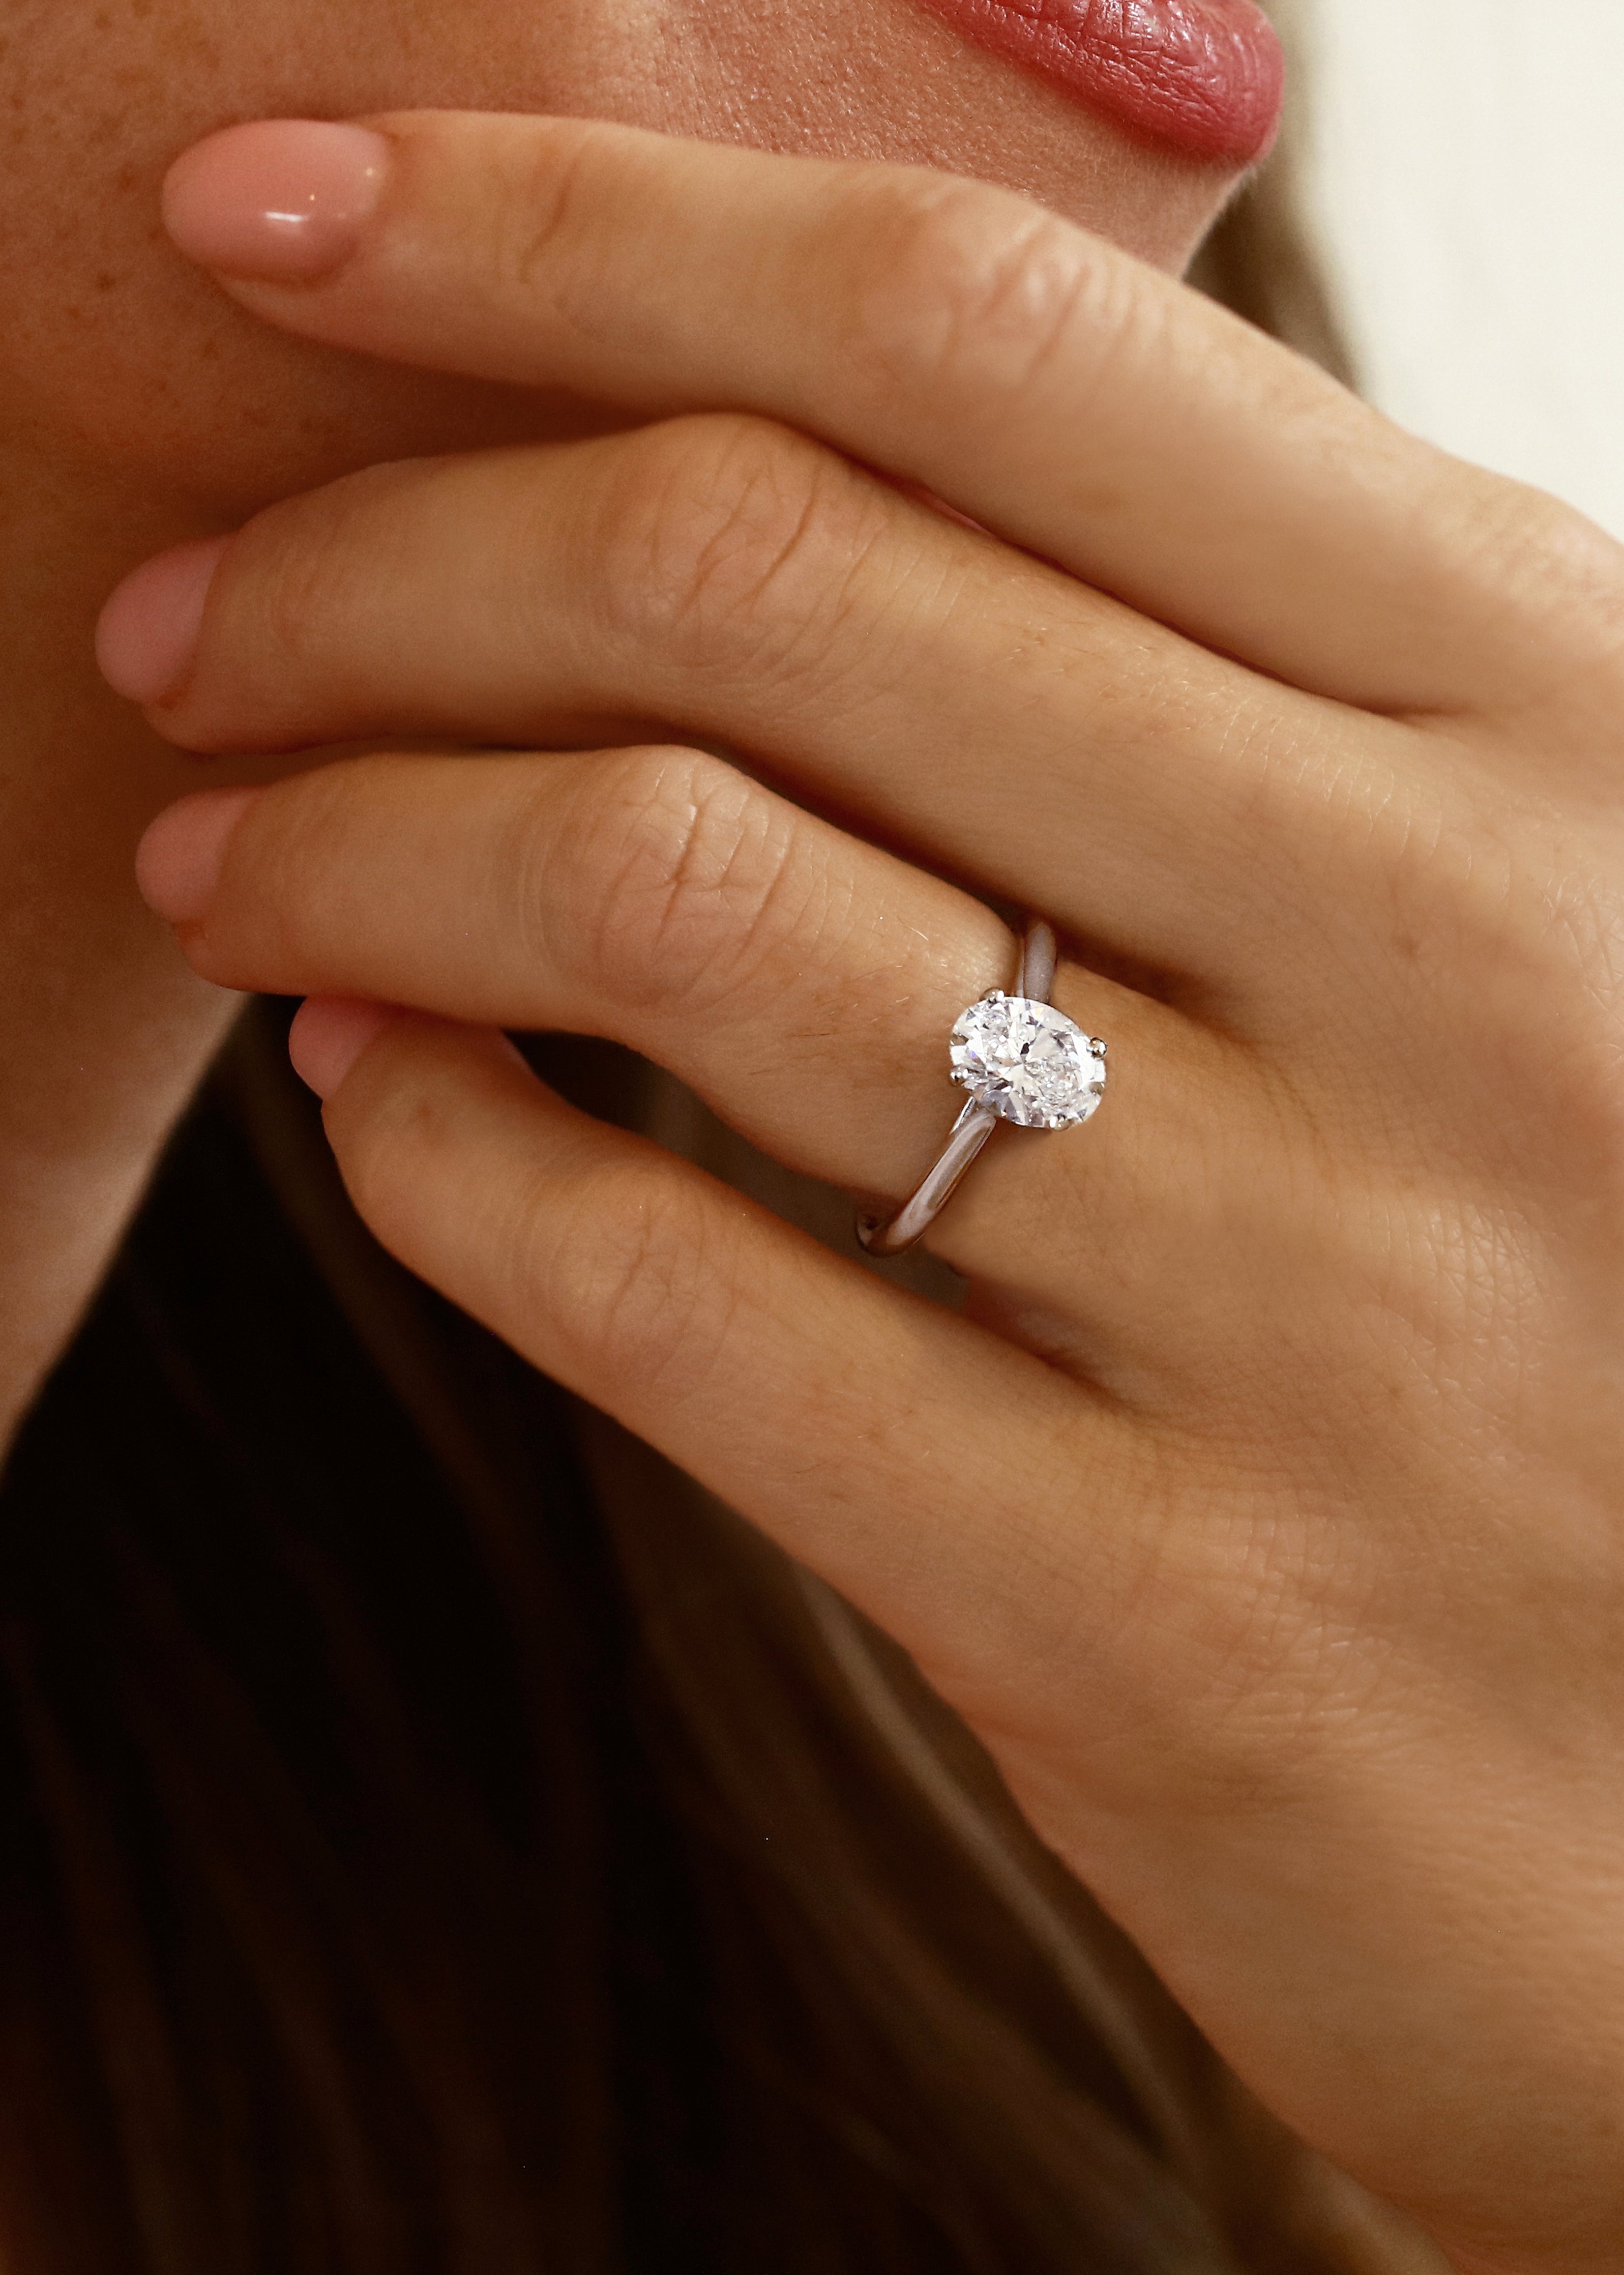 UK Engagement Ring Shopping Guide - Style Guide The Lane